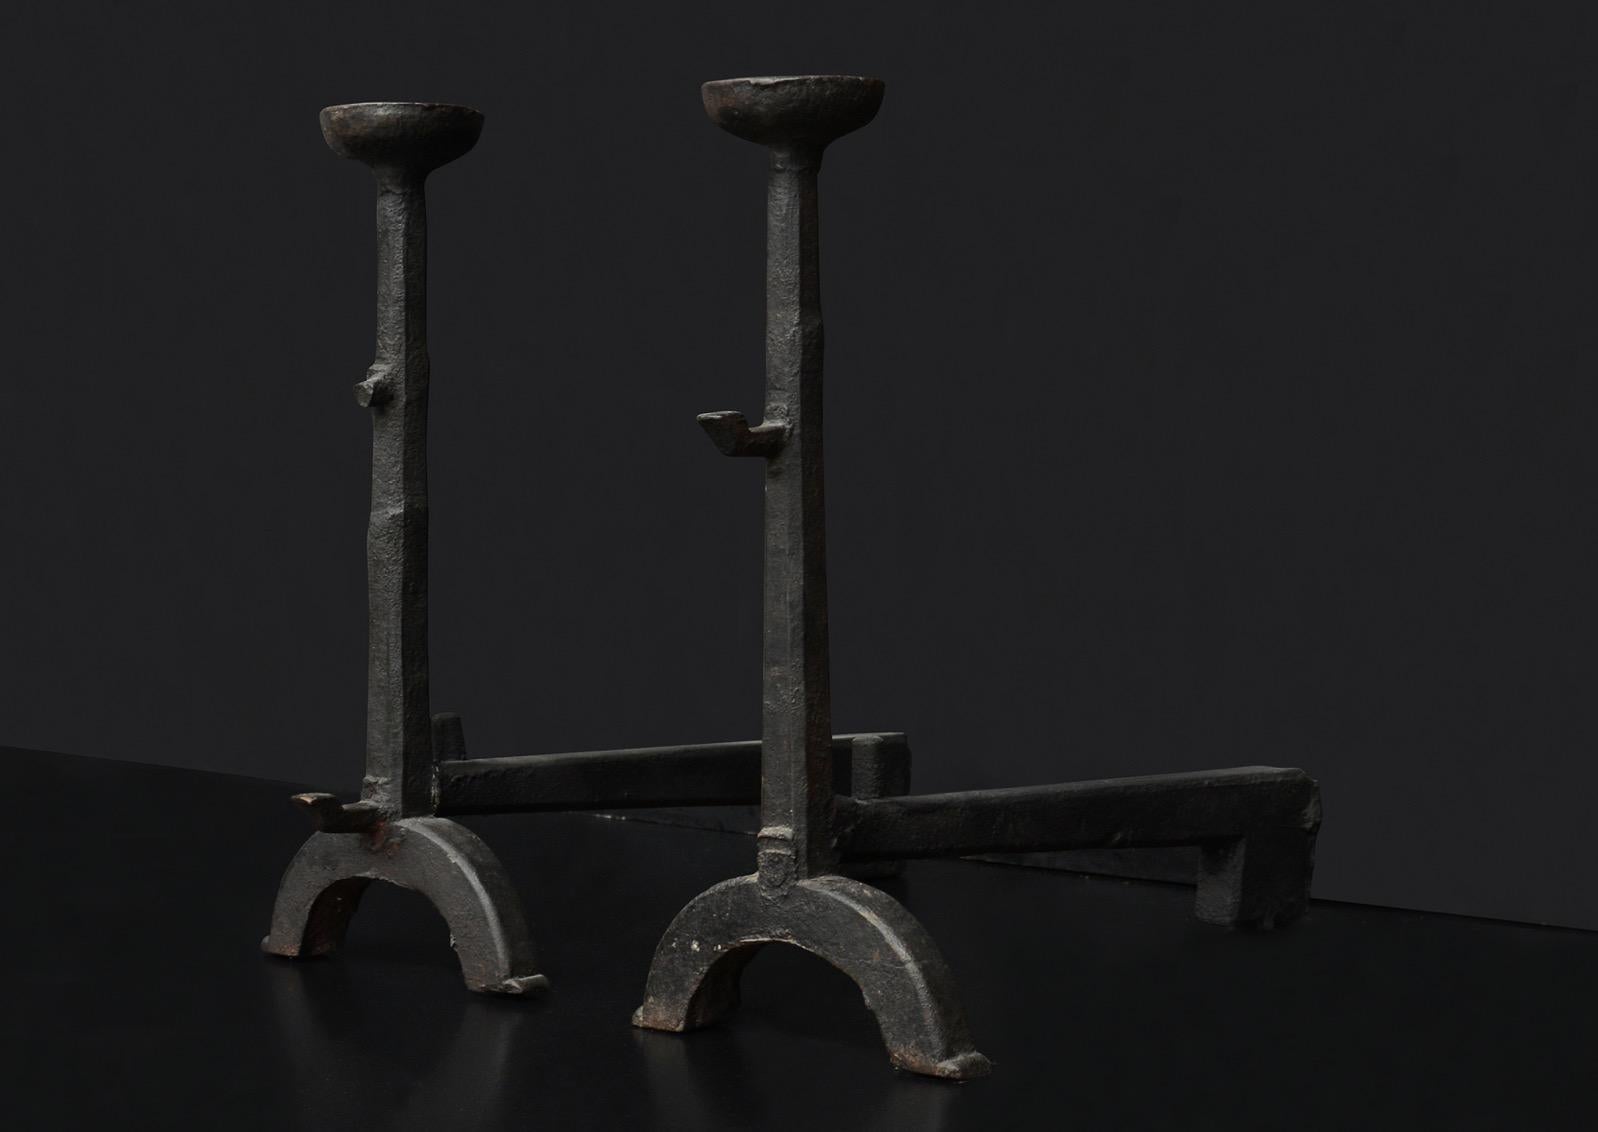 A pair of rustic cast iron firedogs with arched feet, tapering shafts and mulling top finials. English. Heavy and imposing.

Measures: Height: 615 mm 24 1/4 in
Width: 280 mm 11 in
Depth: 580 mm 22 7/8 in.